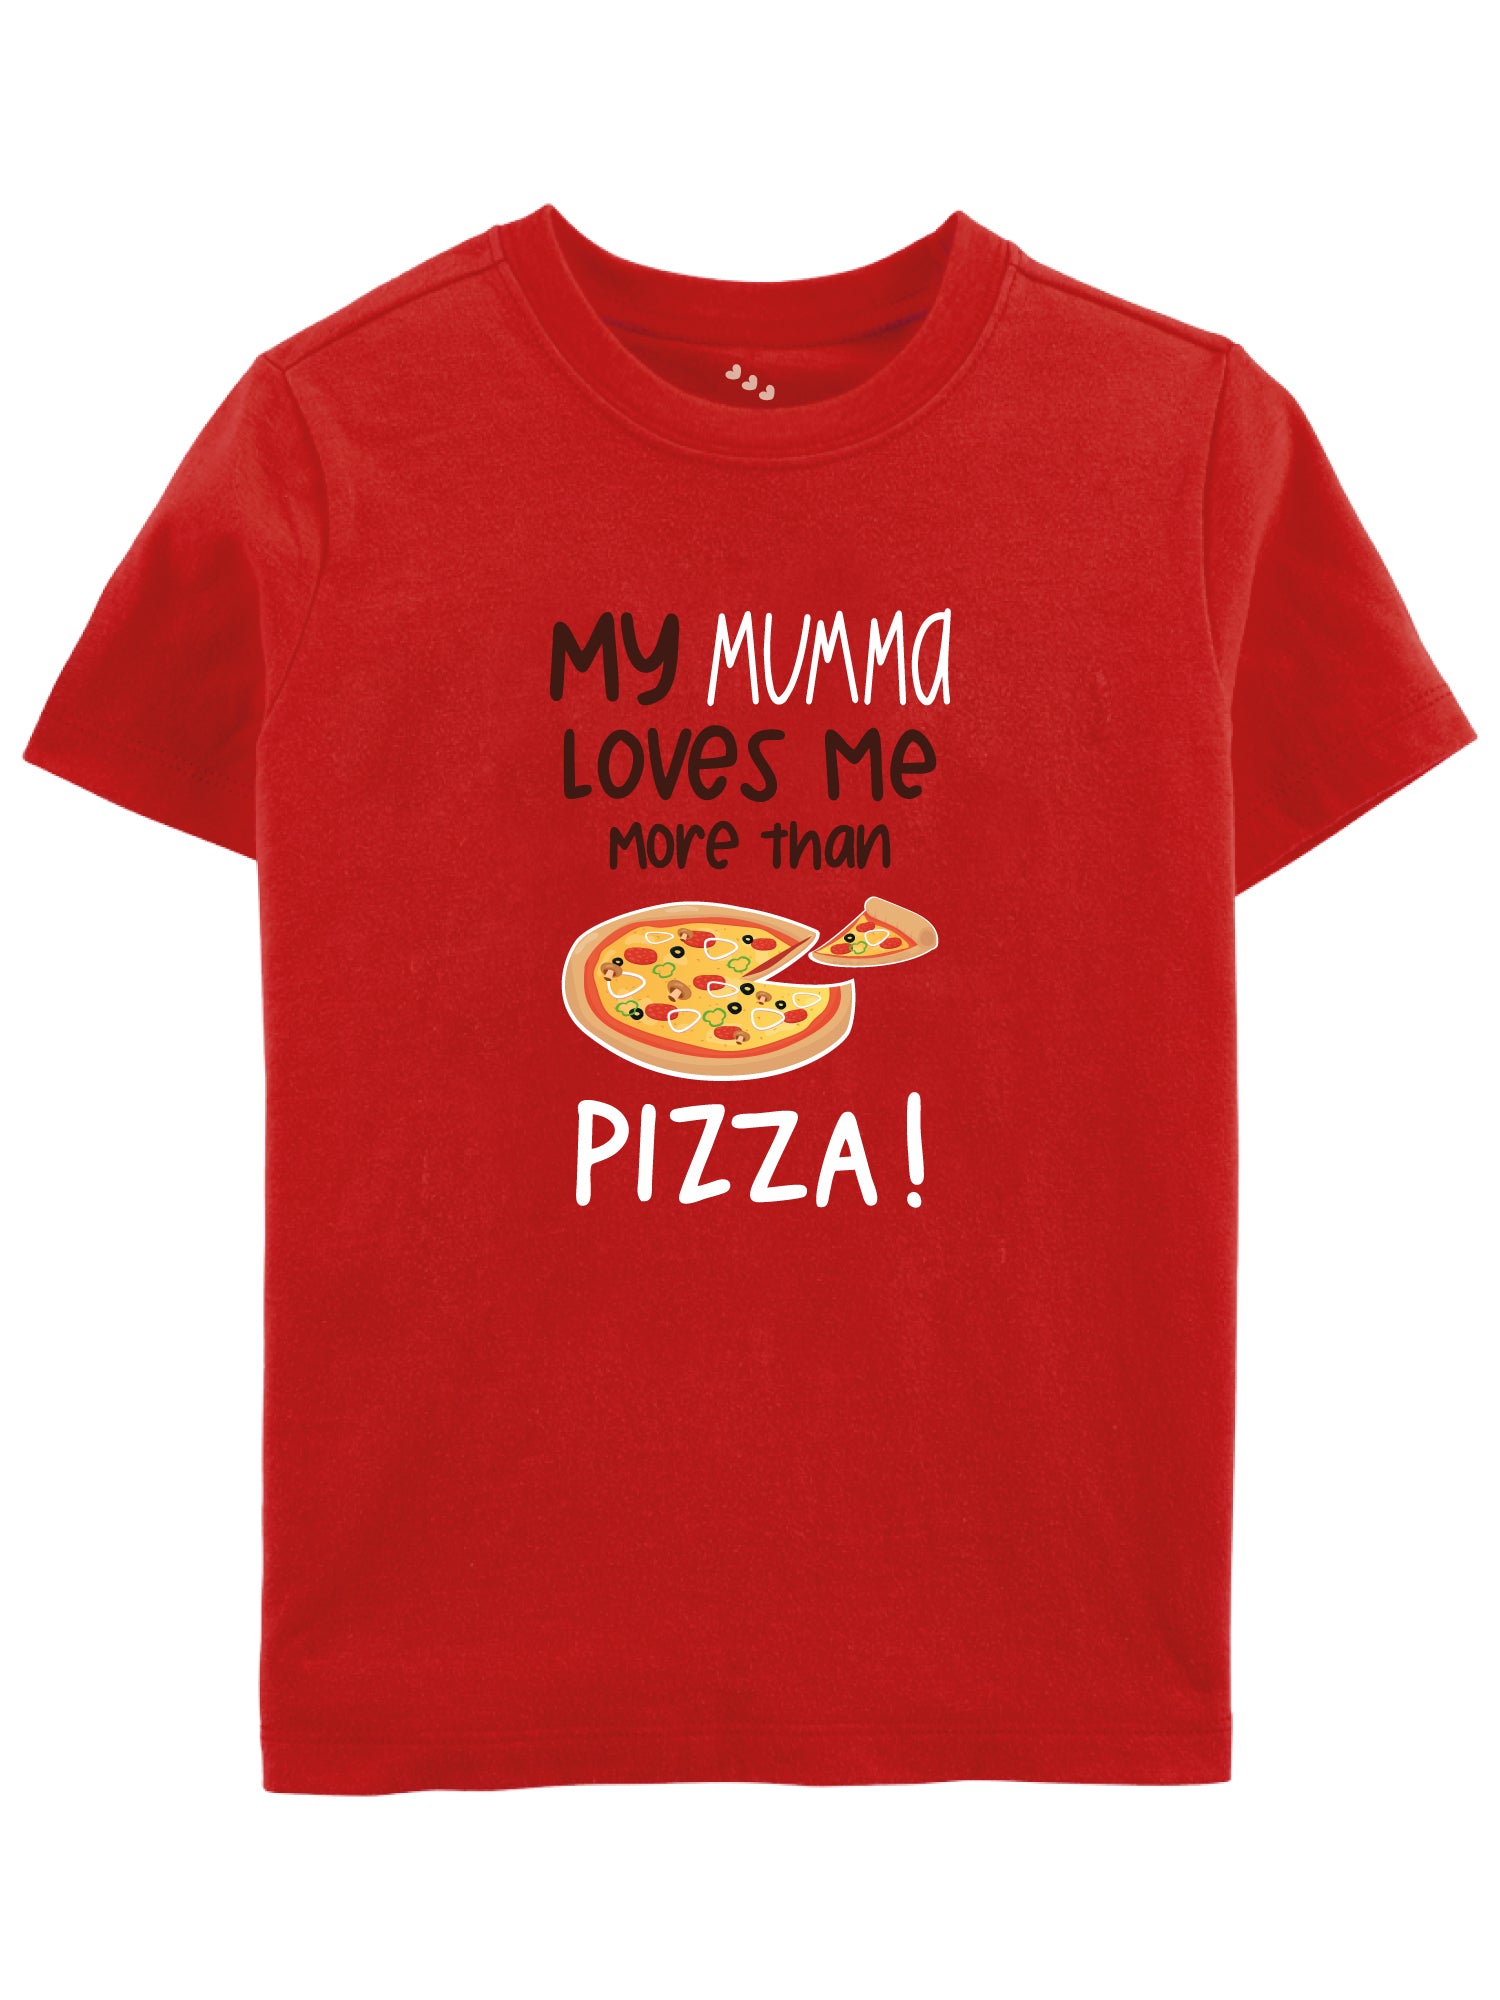 My Mumma Loves me More than Pizza - Tee